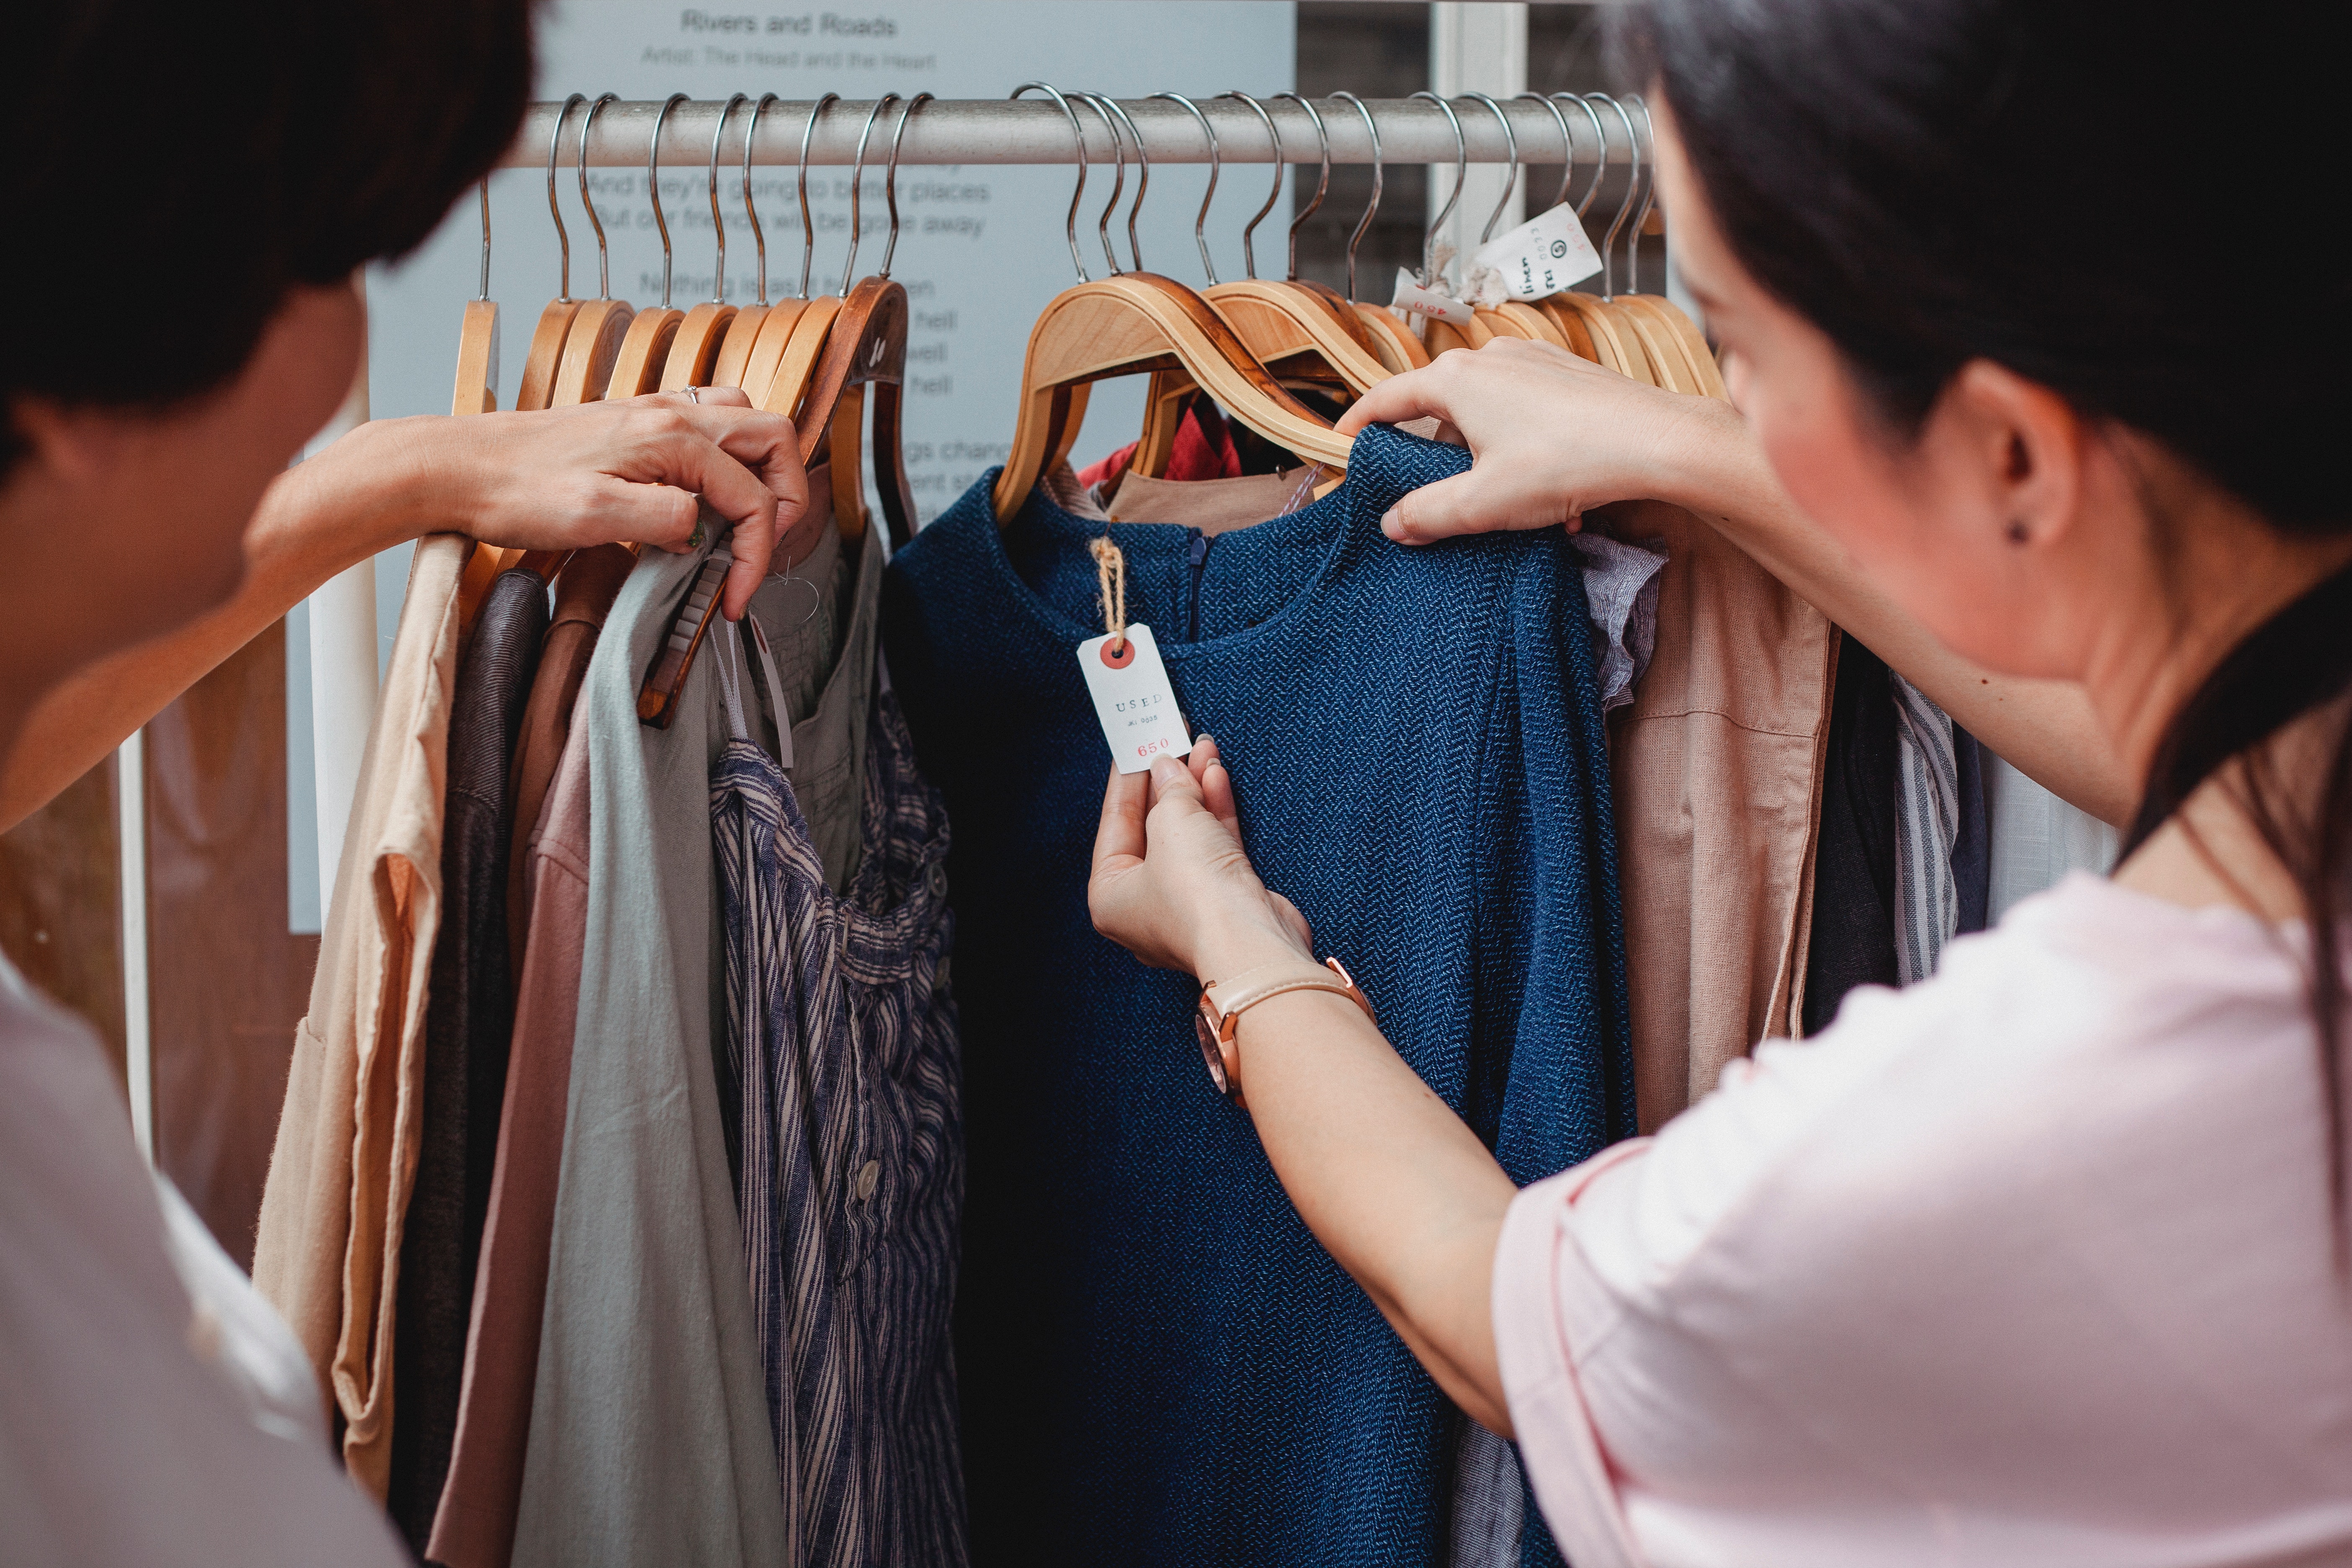 Two shoppers look at the price tag of a clothing item.